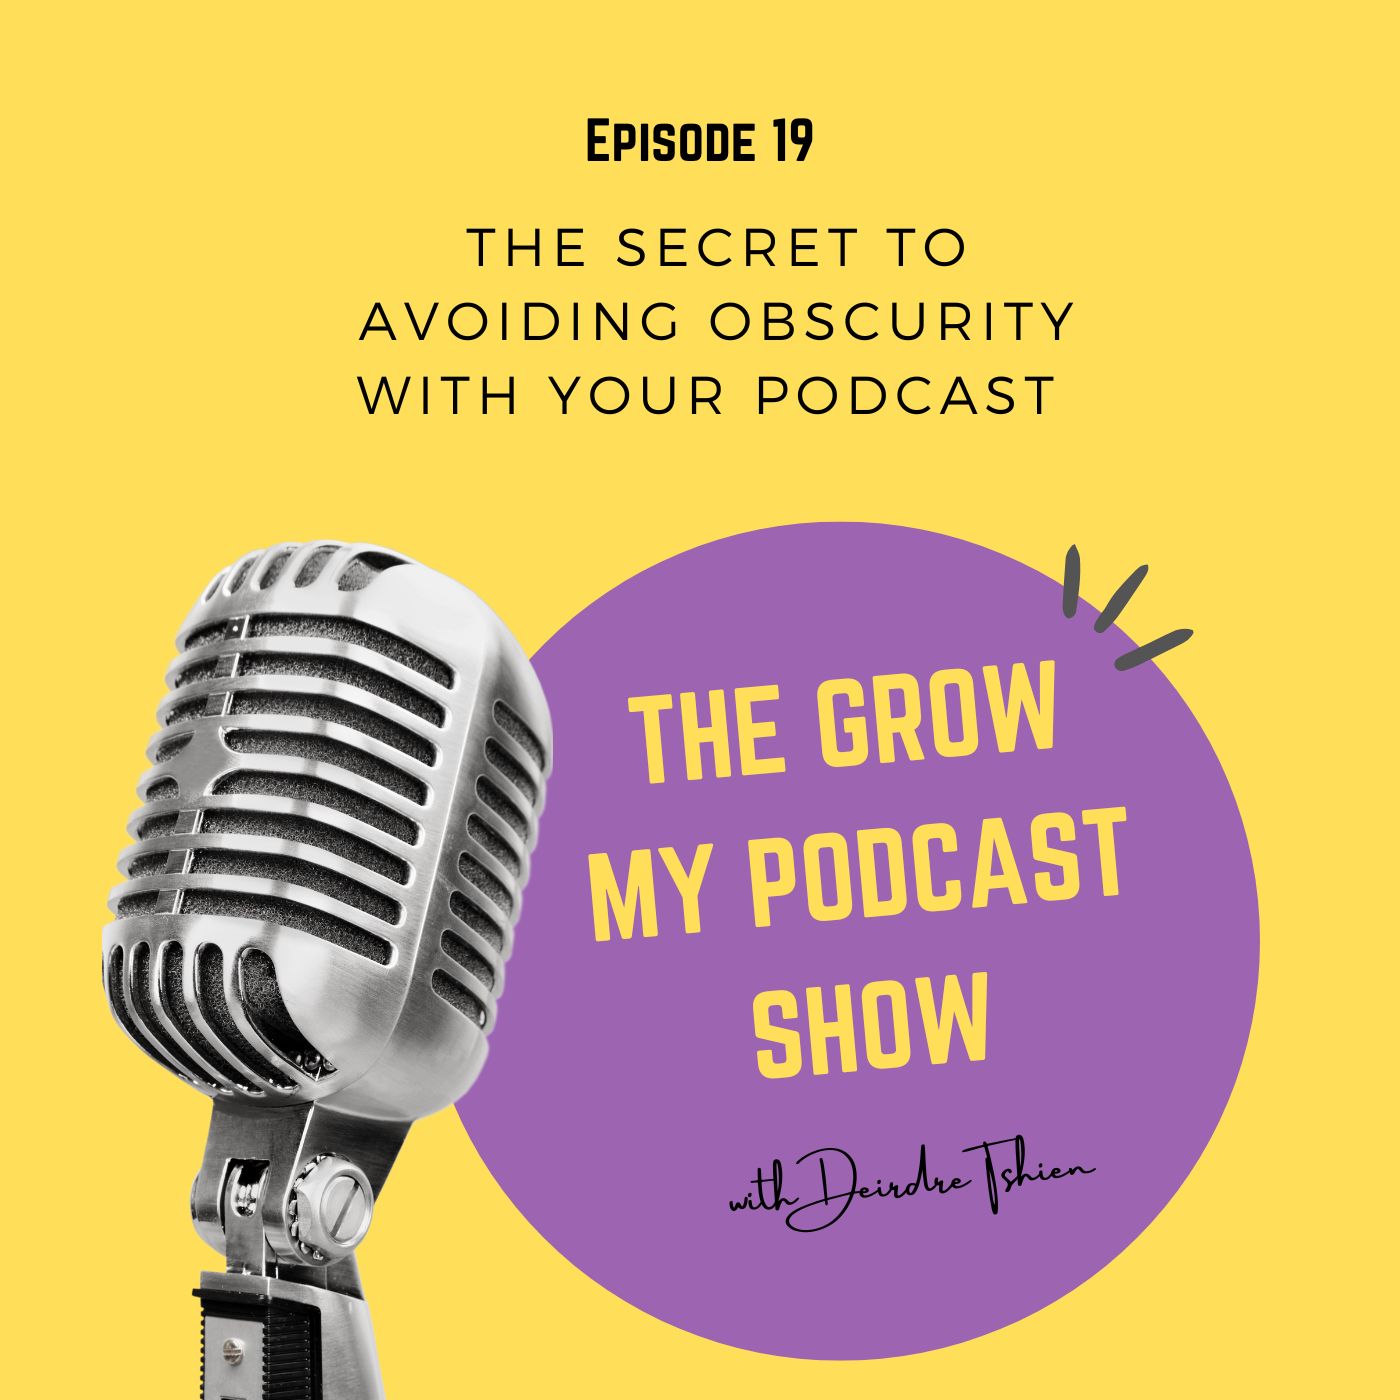 The Secret to Avoiding Obscurity with your Podcast Image